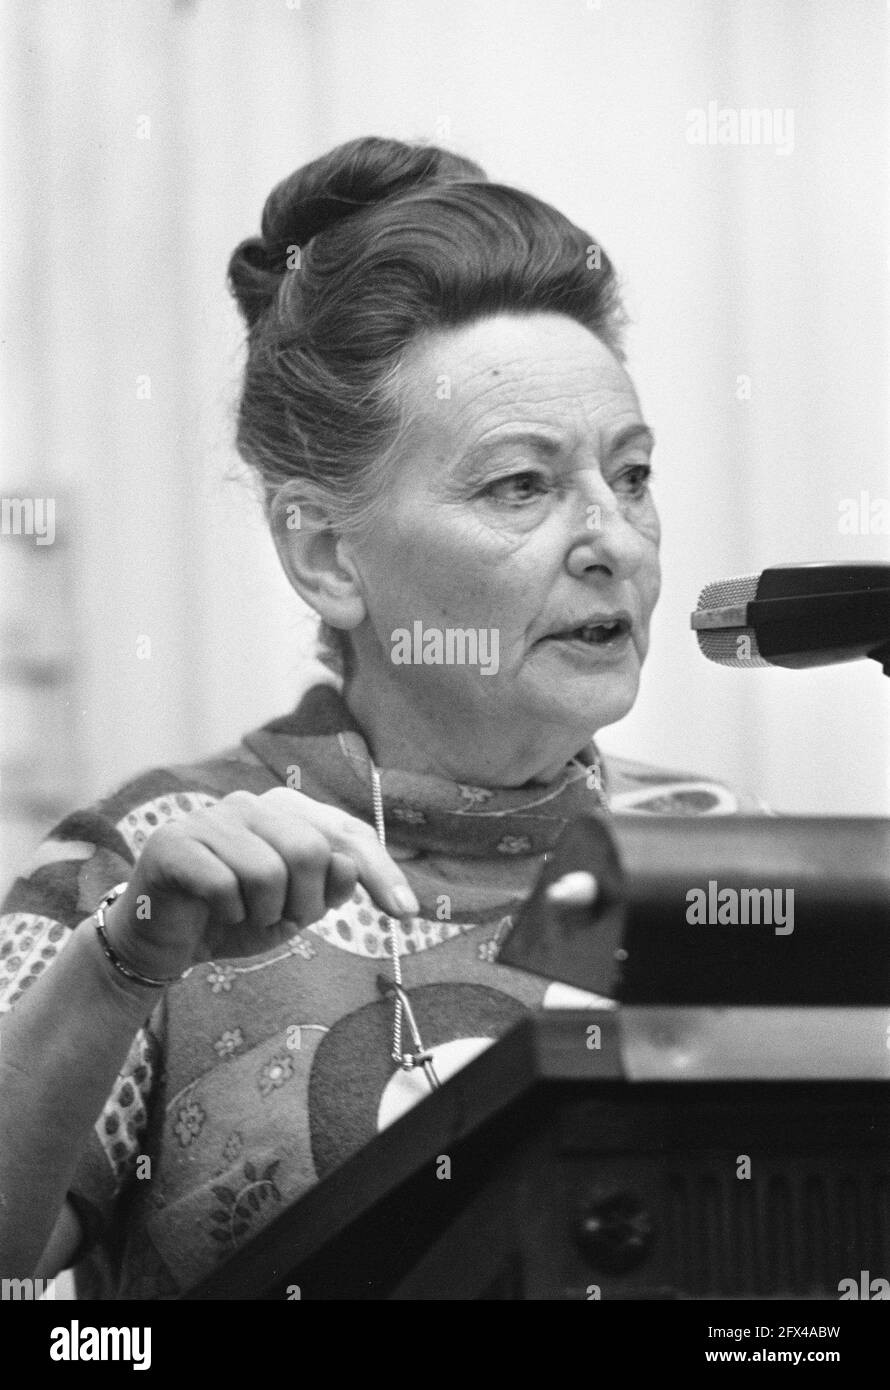 Debate on price freeze in House of Representatives, Gerda Brautigam, November 23, 1972, parliamentary debates, politics, price fixing, The Netherlands, 20th century press agency photo, news to remember, documentary, historic photography 1945-1990, visual stories, human history of the Twentieth Century, capturing moments in time Stock Photo